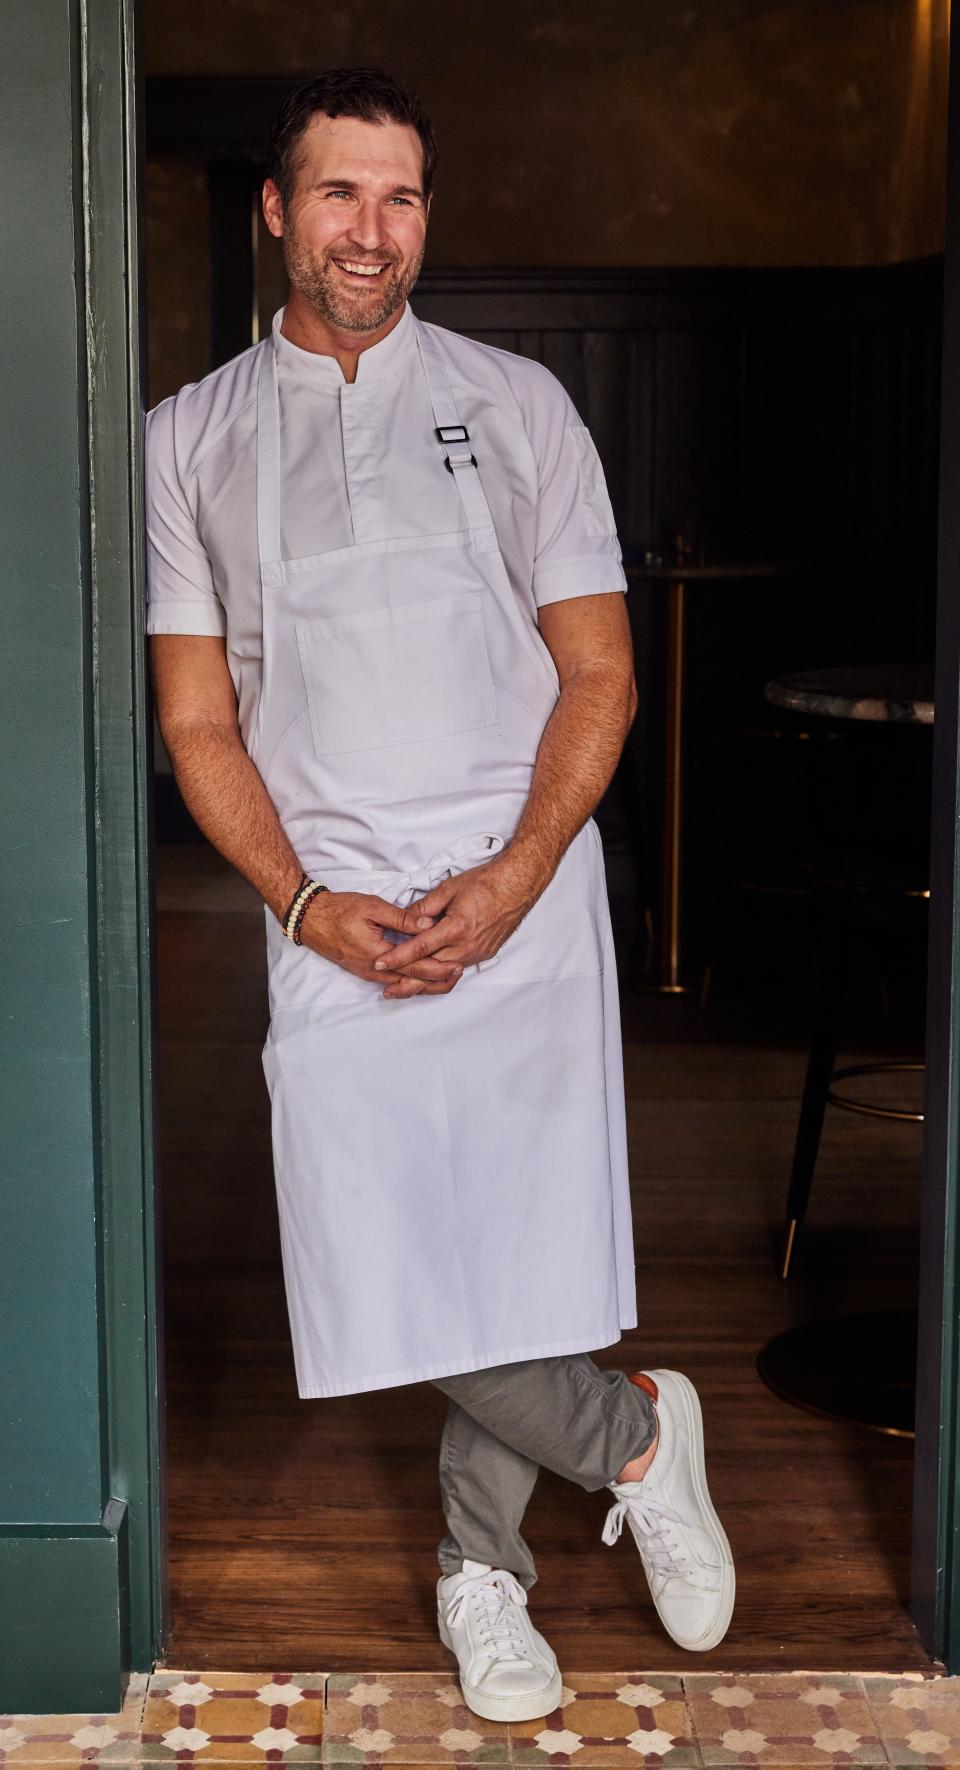 Chef Mathew Peters worked for chef Thomas Keller for eight years and became the first American winner of the gold medal at the Bocuse d'Or before moving to Texas in 2017.